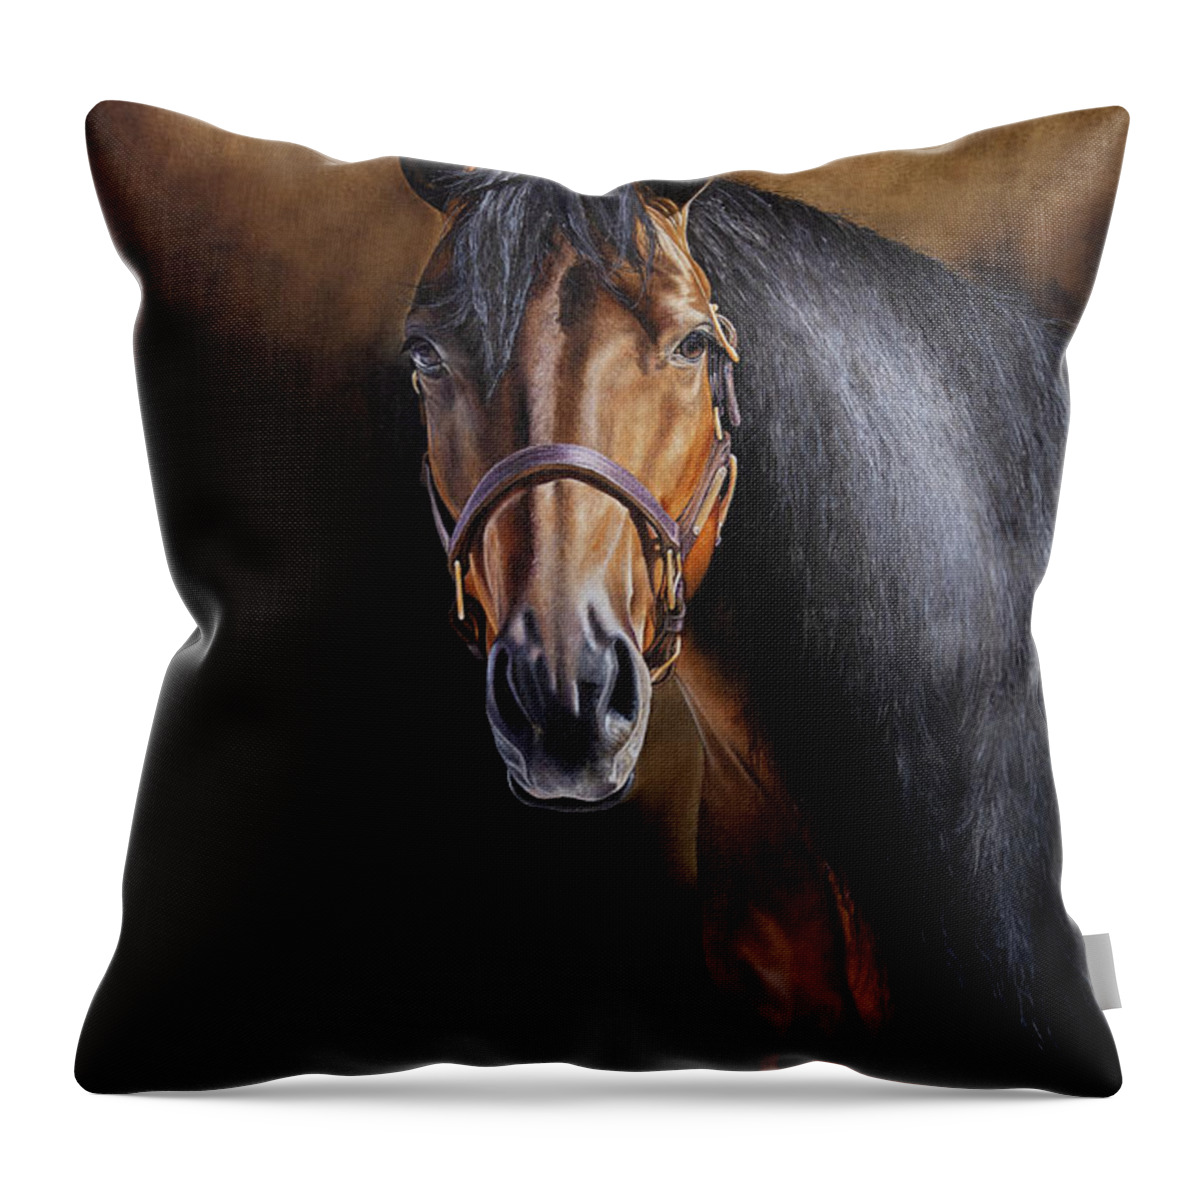 Aqha Throw Pillow featuring the painting Amos by Joni Beinborn